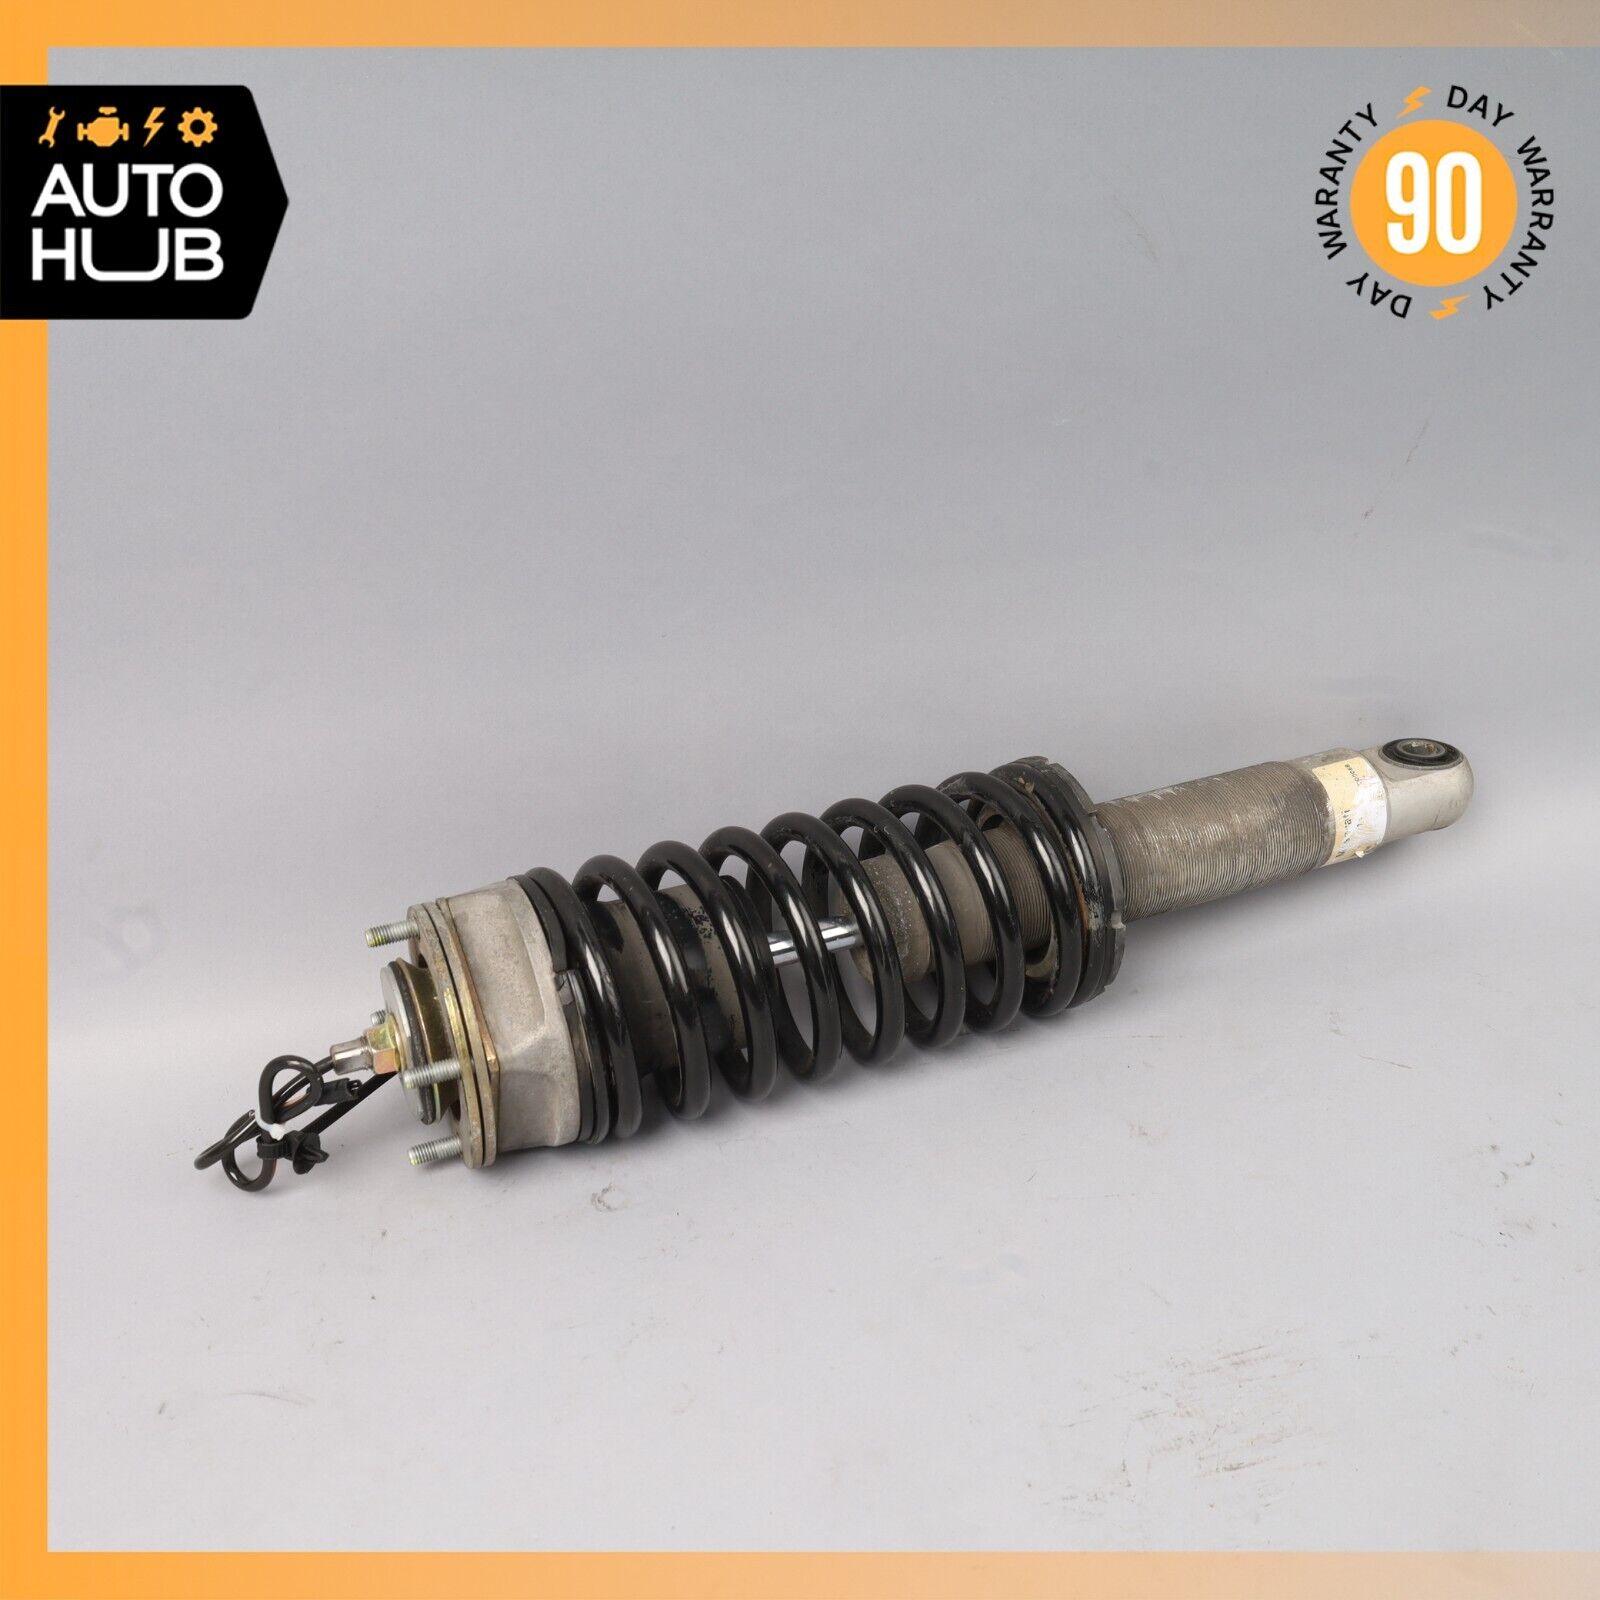 02-07 Maserati Coupe 4200 M138 GT Rear Left or Right Shock Strut Absorber OEM